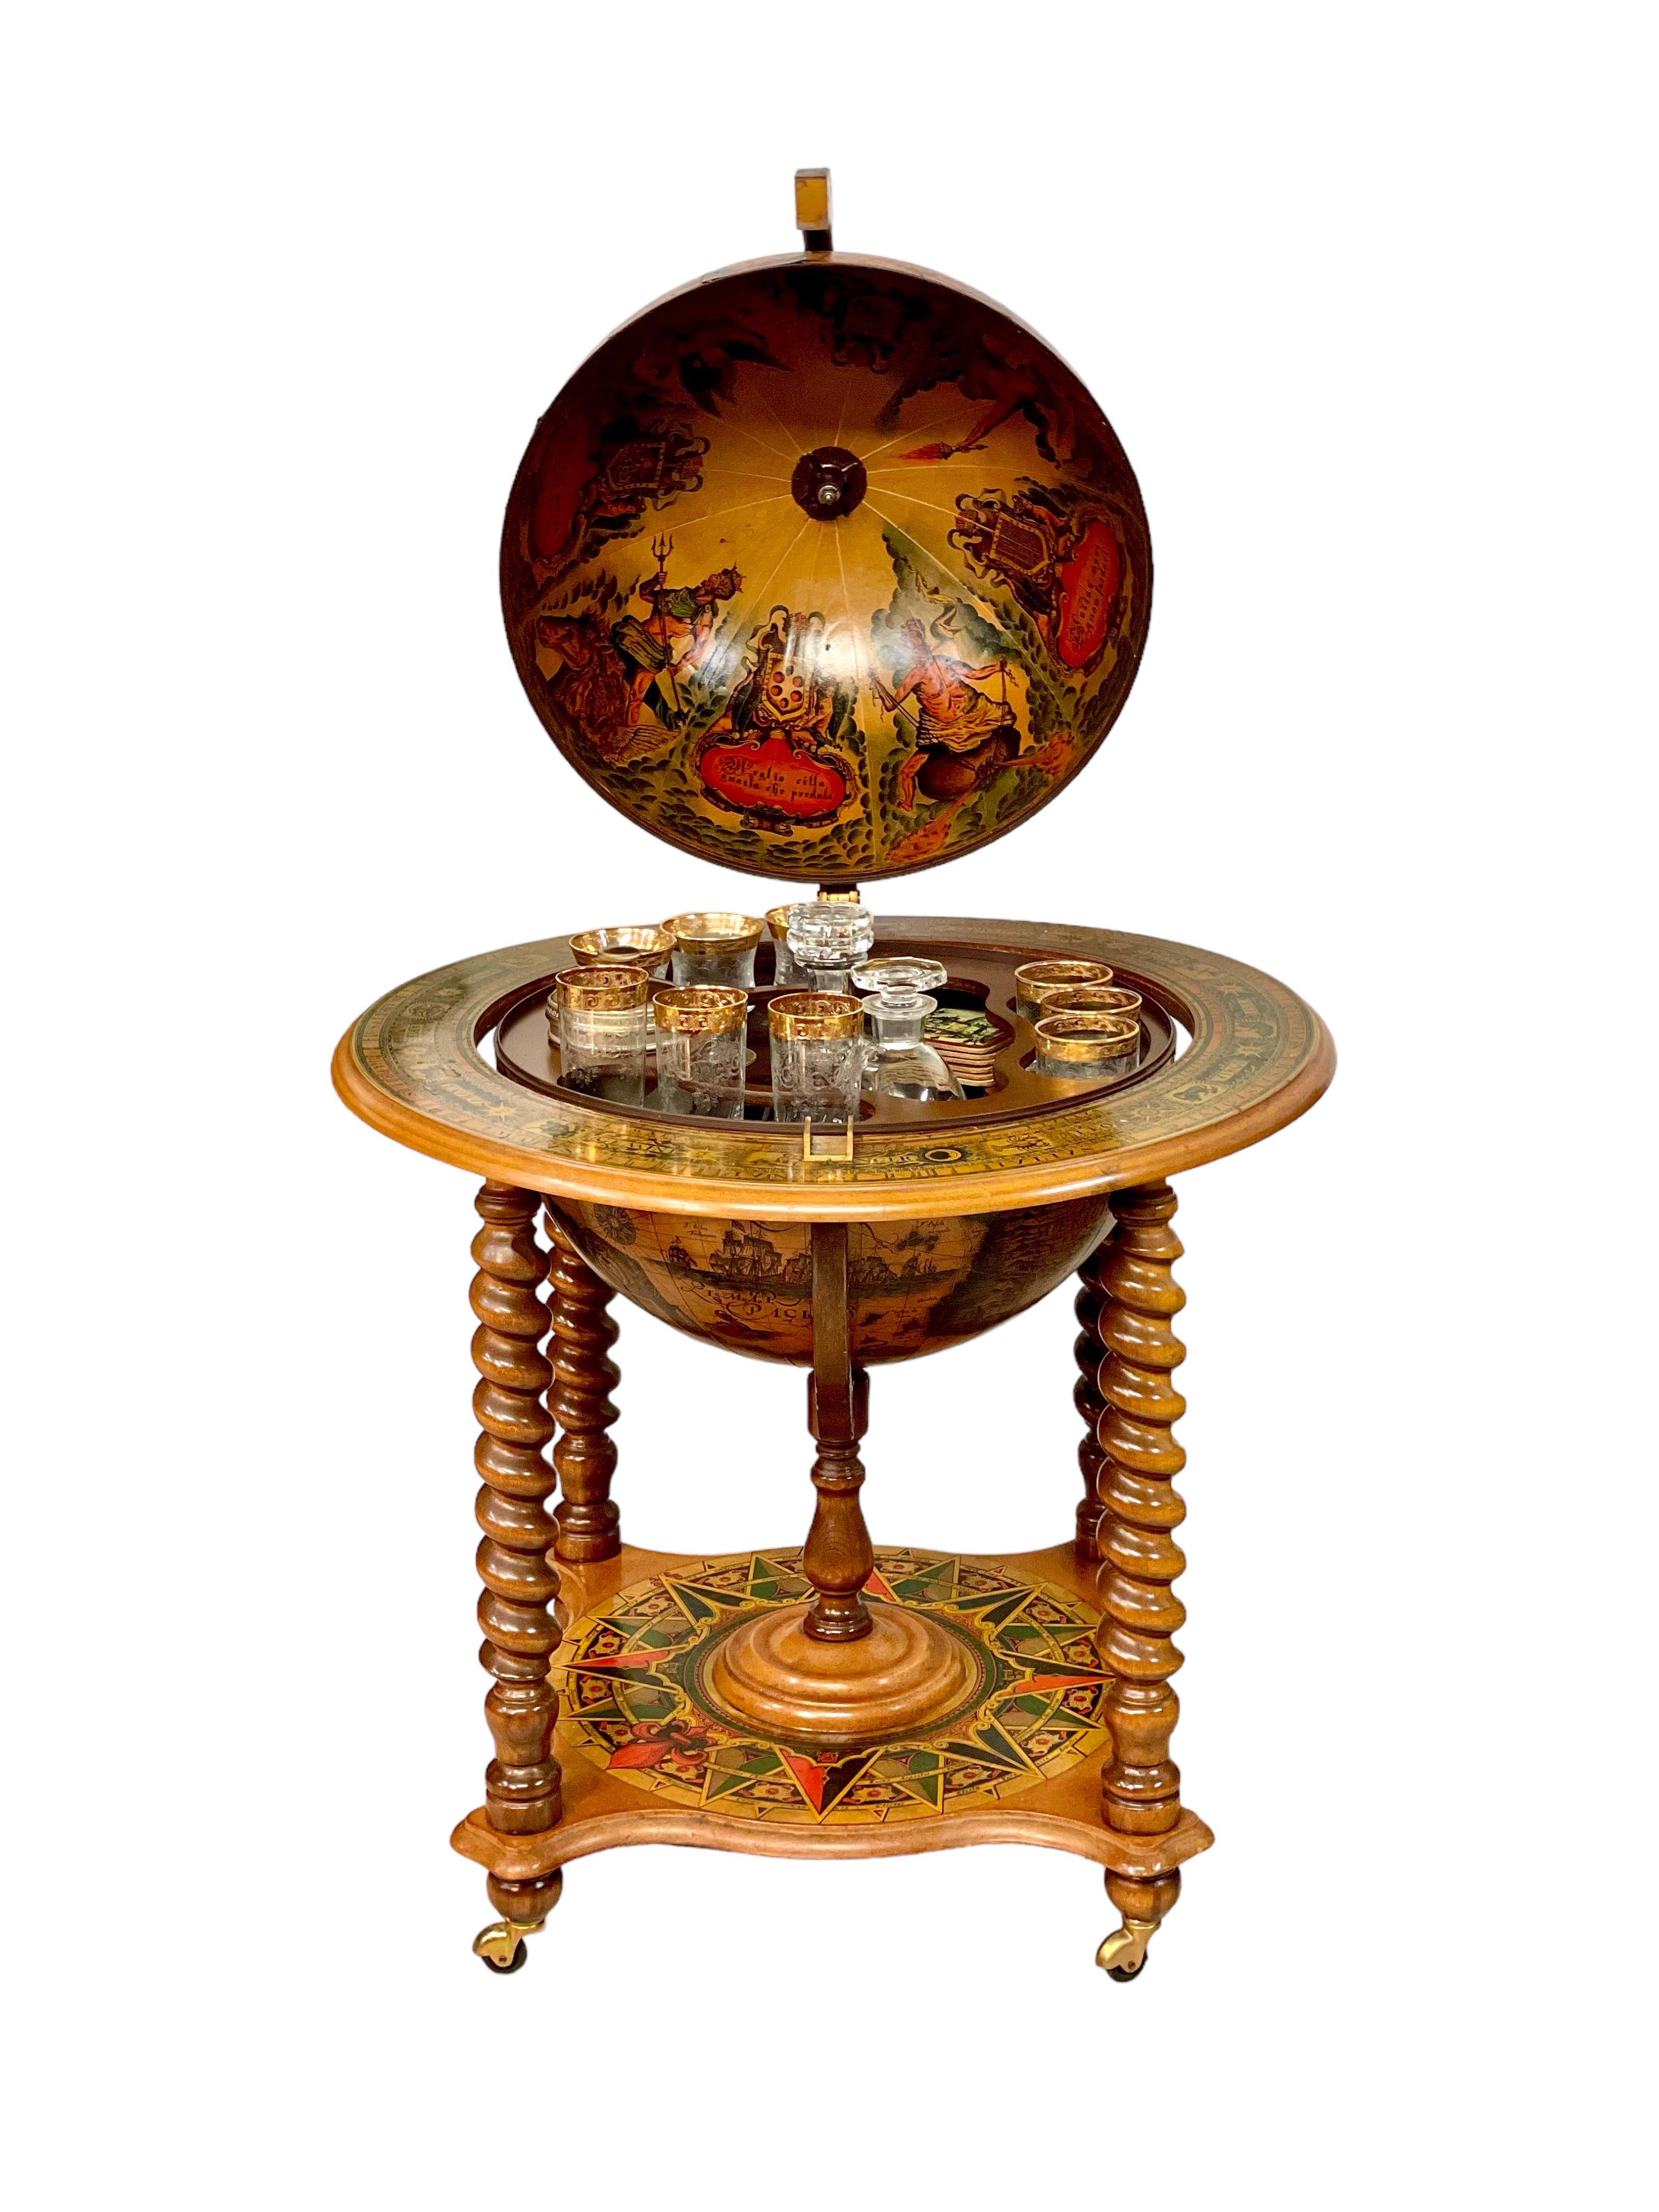 Imagine yourself transported to the charm of the mid-20th century with this magnificent vintage French cabinet-bar. This cabinet, with its timeless elegance, takes the form of a globe on a stand, lavishly adorned with antique maps, constellations,